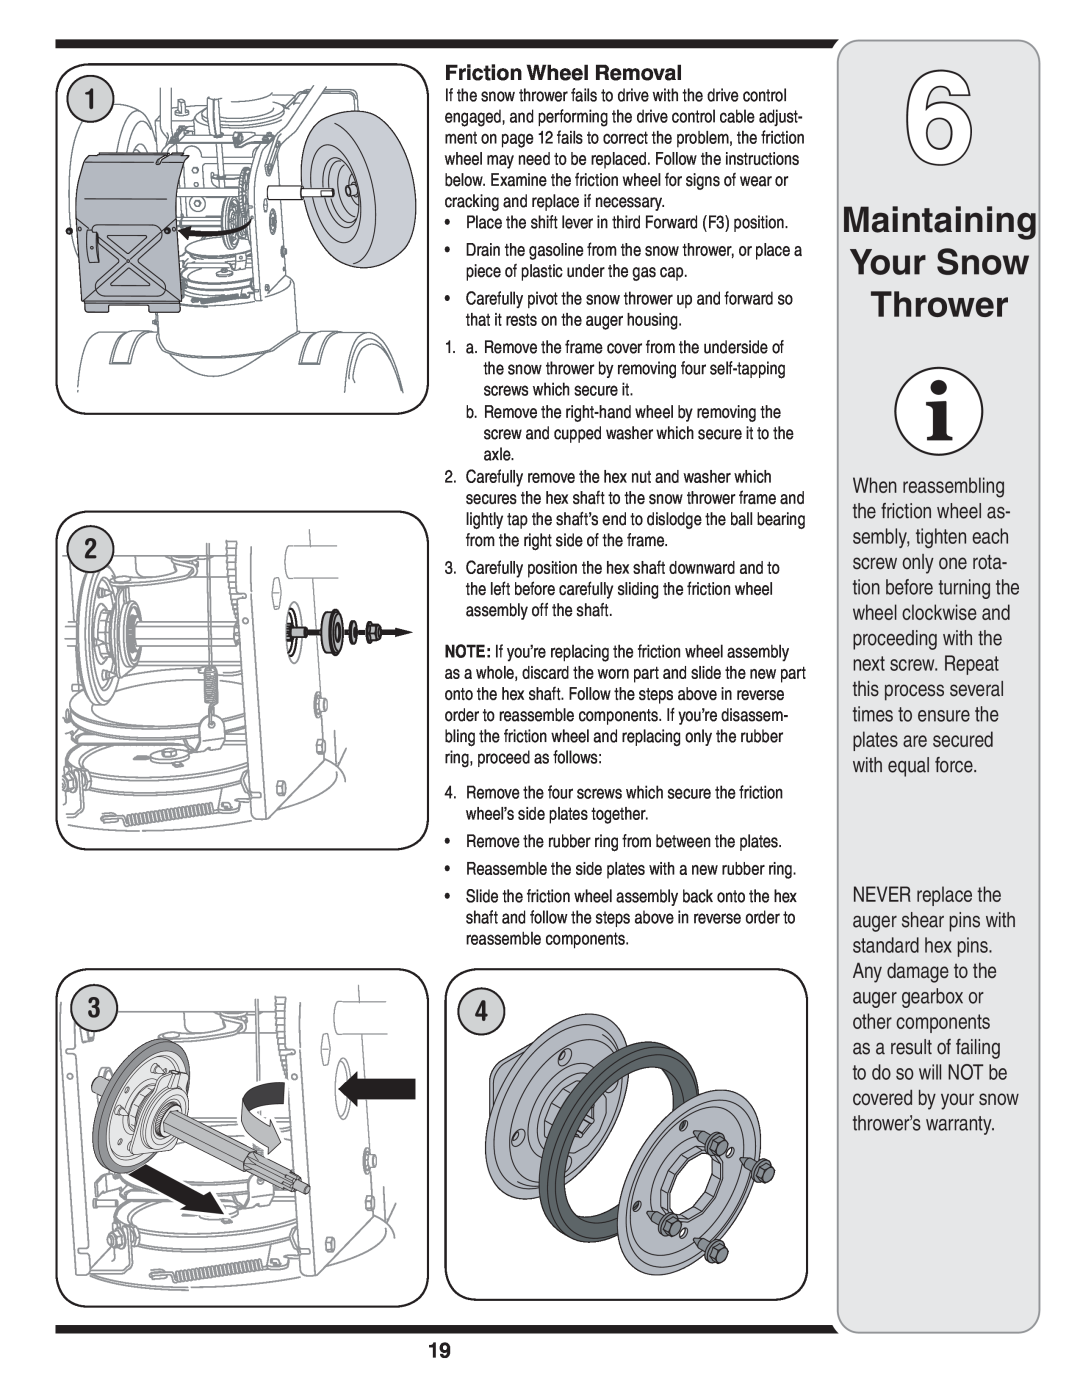 Troy-Bilt 772C0772 Maintaining Your Snow Thrower, Friction Wheel Removal, Carefully remove the hex nut and washer which 